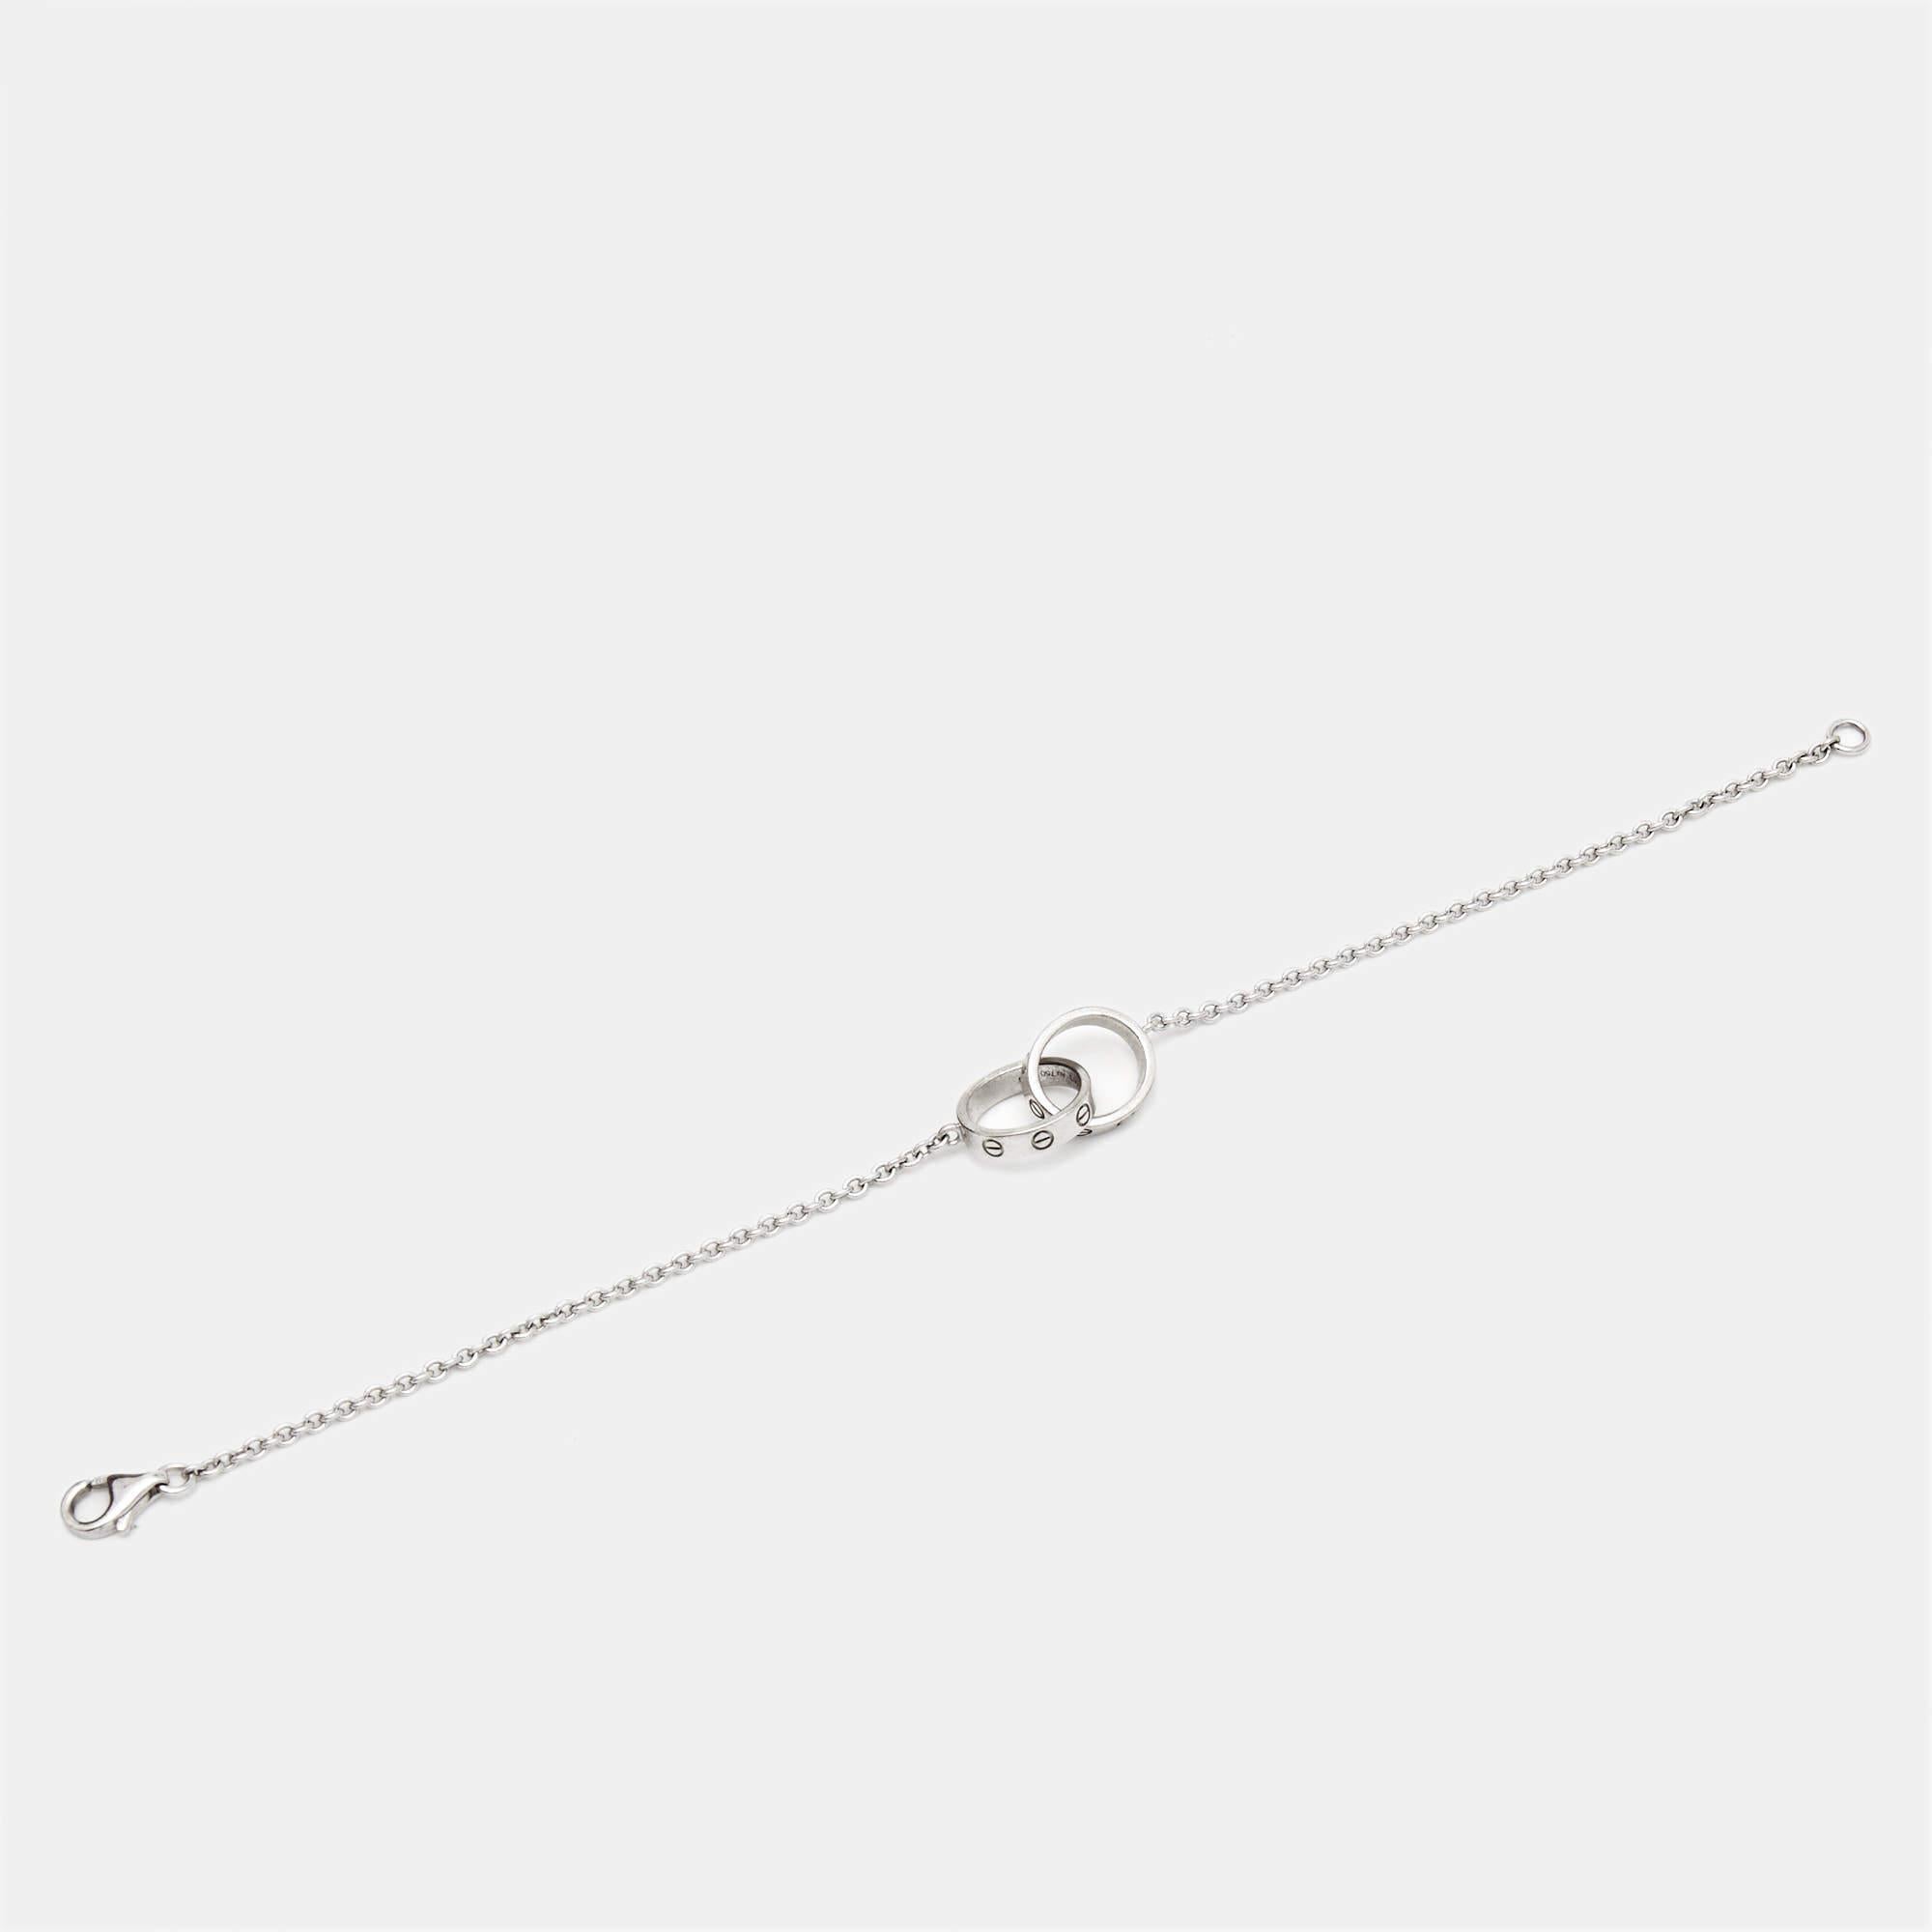 Celebrate timeless love with this bracelet from Cartier's Love collection. It is sculpted from 18k white gold, and the chain holds two magnificent hoops interlocked with one another. Both the rings carry the iconic screw motifs—a signature of the